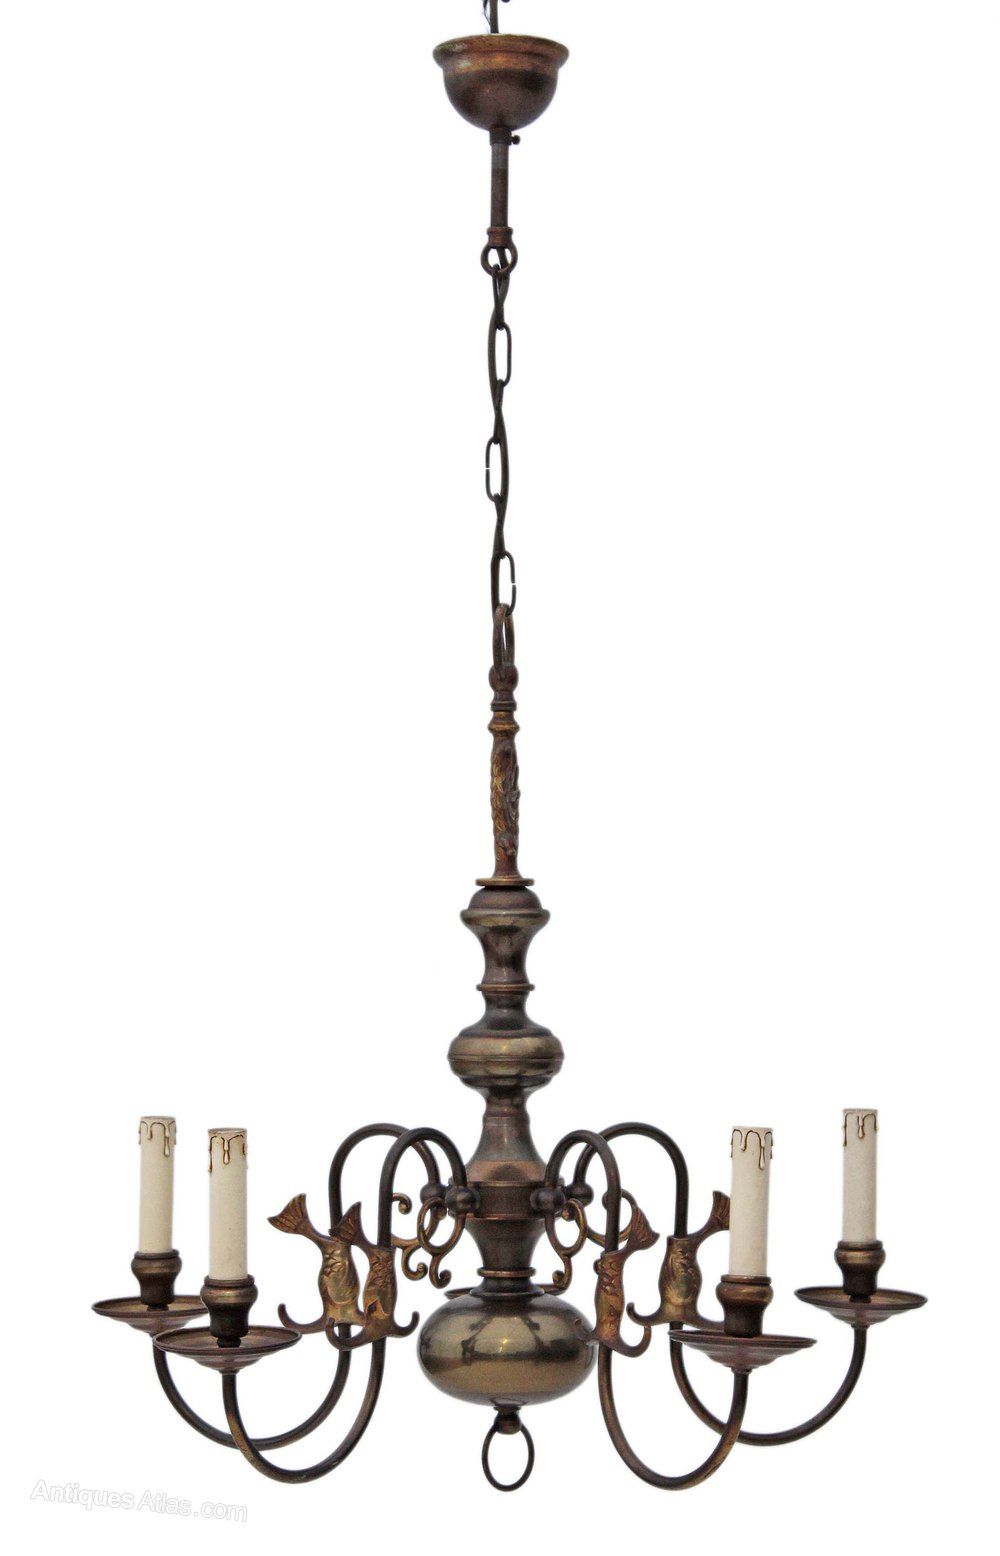 Antiques Atlas – Flemish 5 Lamp Brass Bronze Chandelier Intended For Old Bronze Five Light Chandeliers (View 6 of 15)